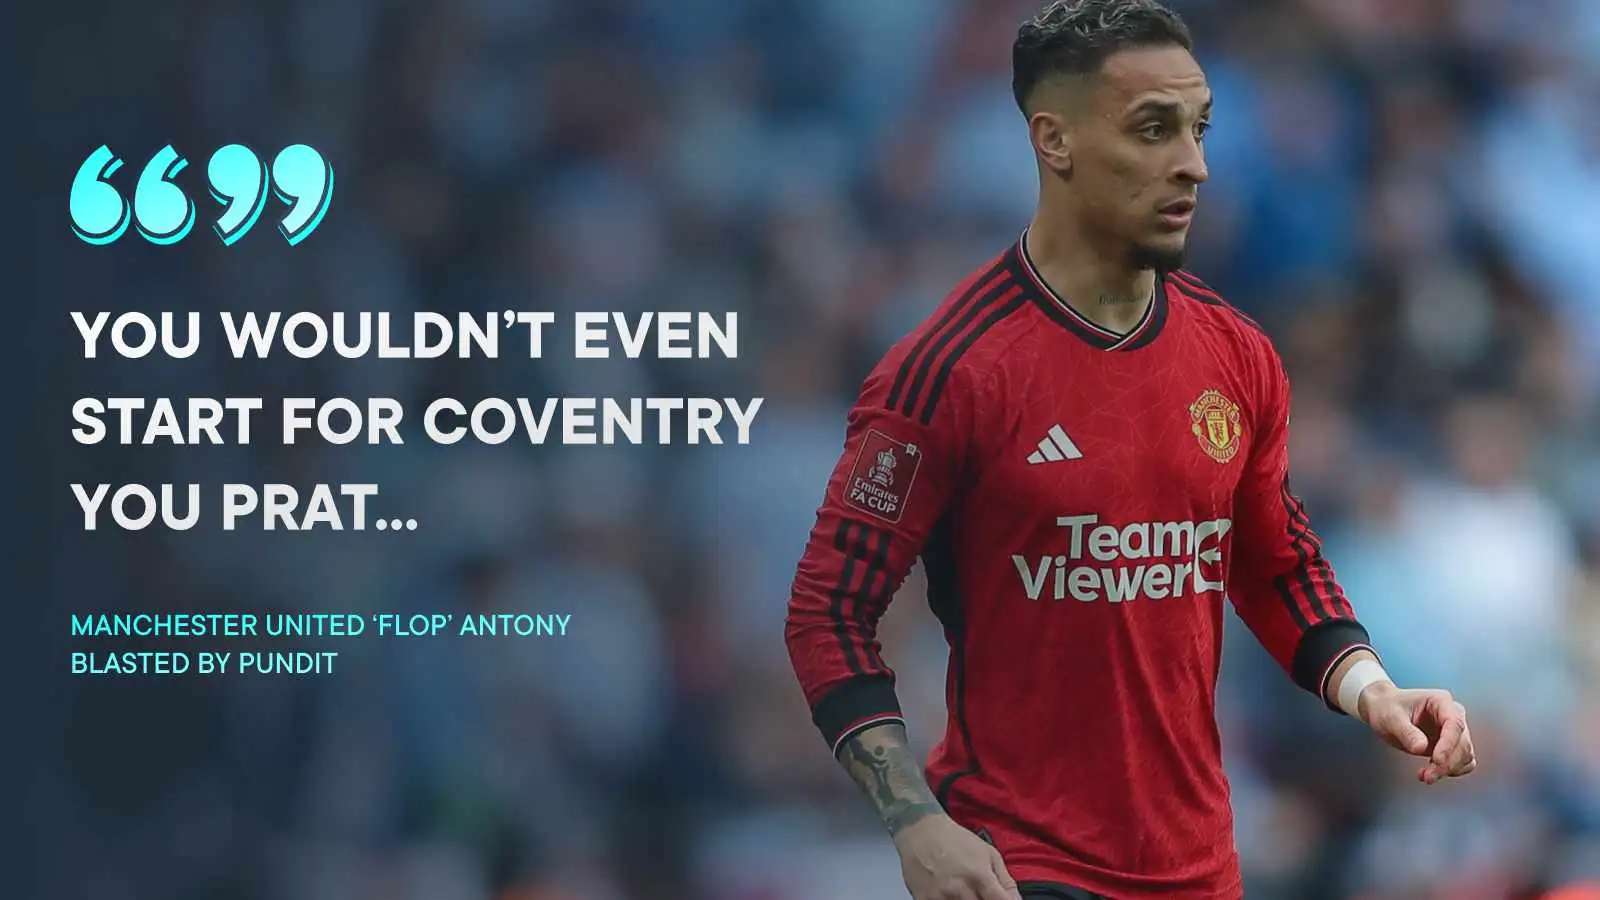 Man Utd 'shameless flop' blasted as pundit claims he 'wouldn't' even start'  for Coventry - 'you prat'